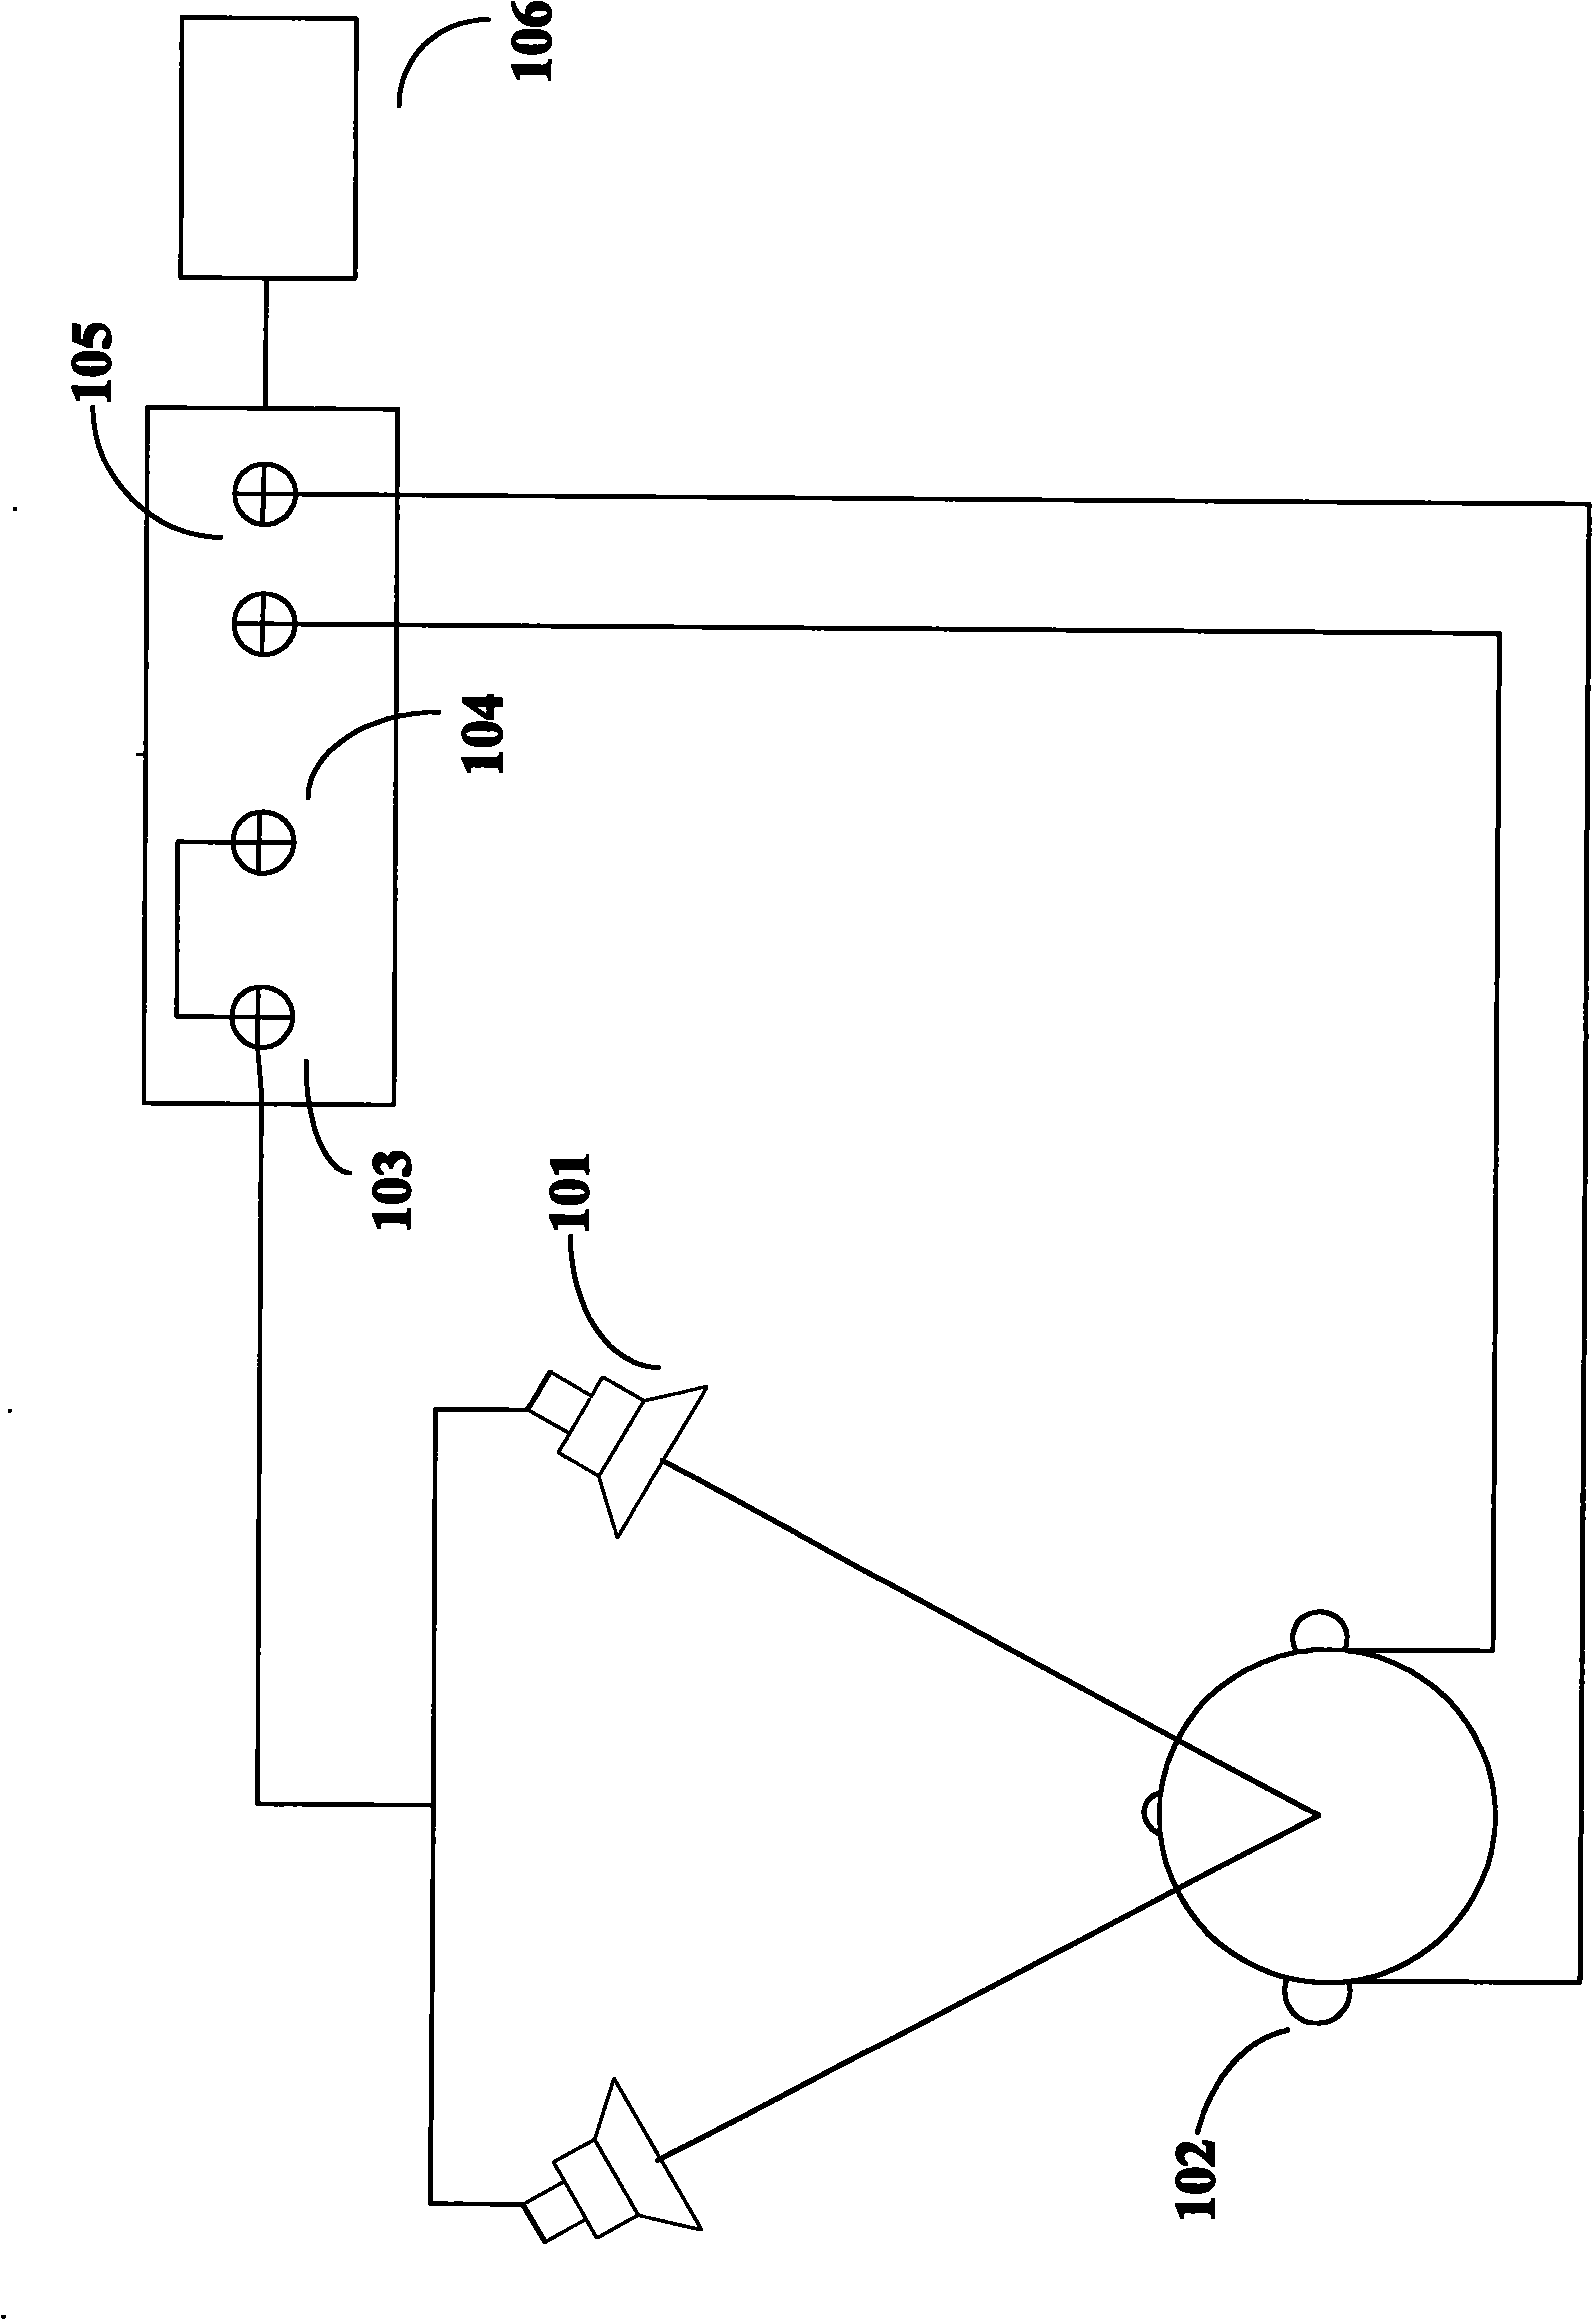 Measurement system and measurement method for head-related transfer function in common environment